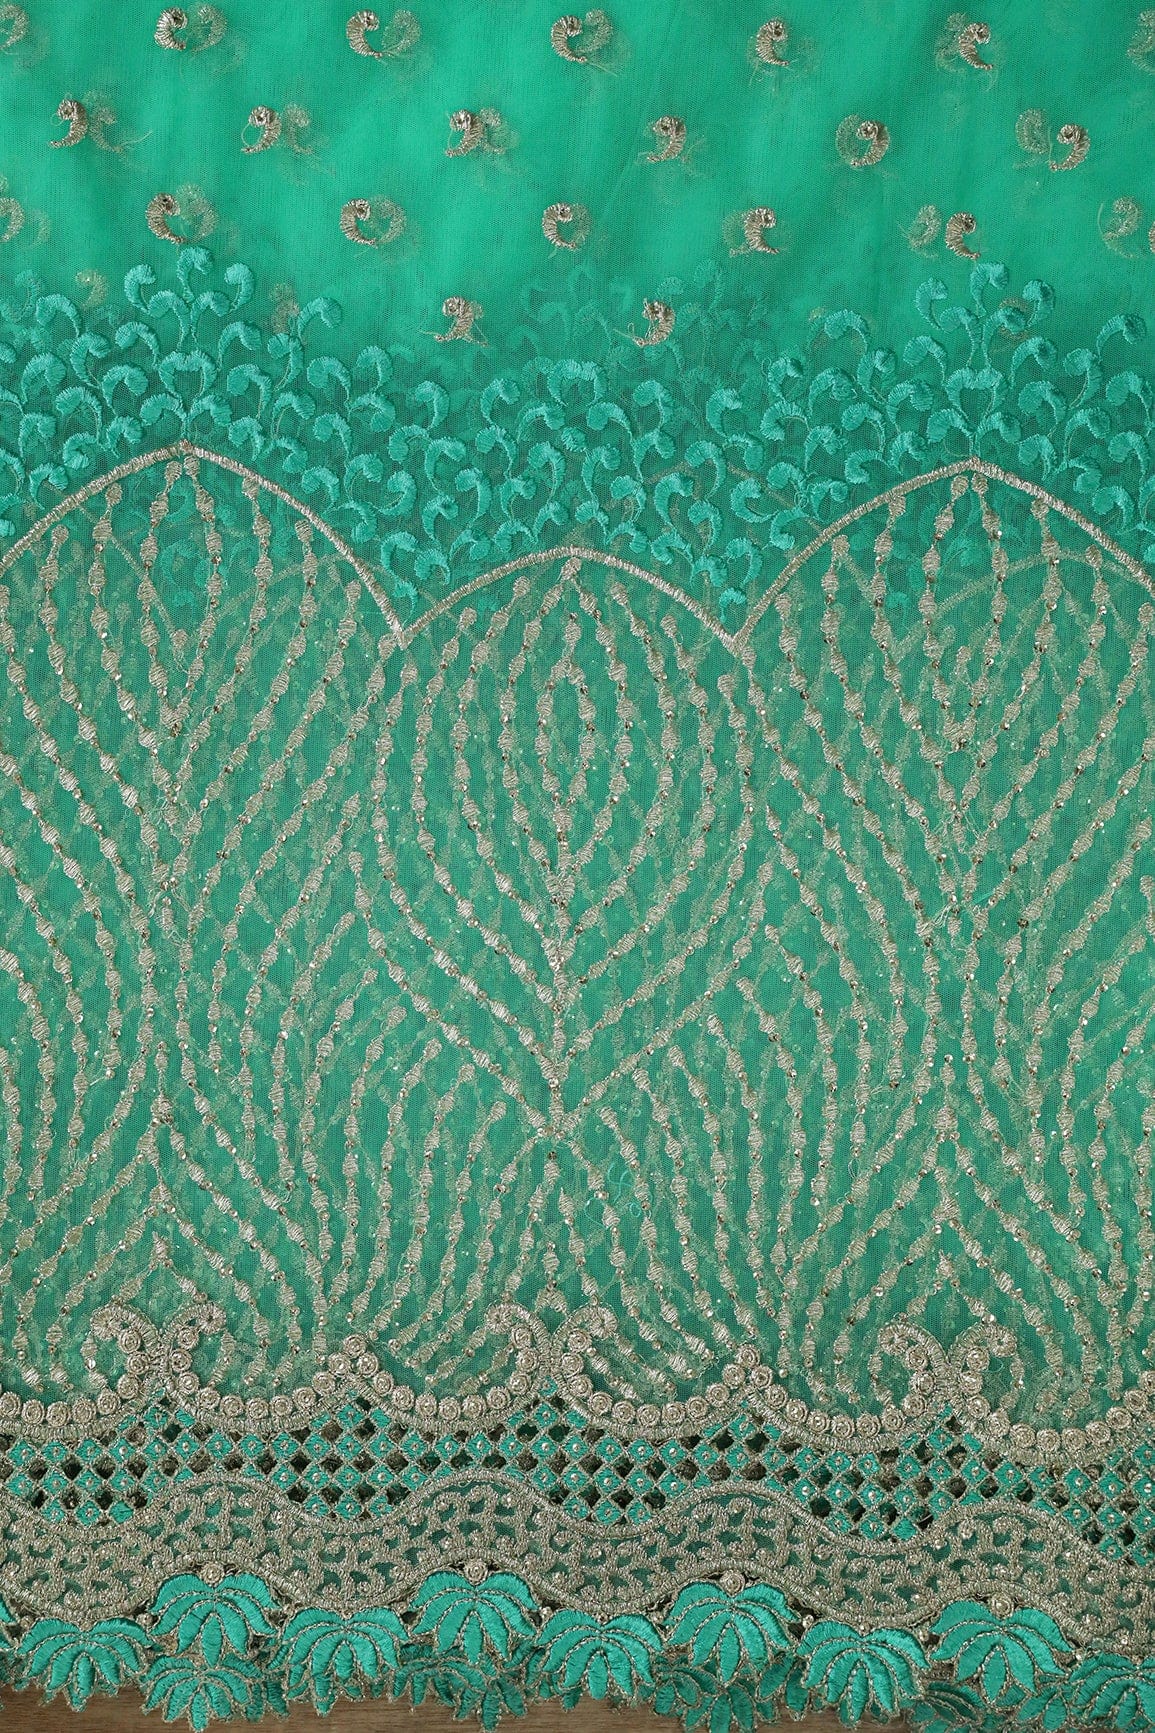 Big Width''56'' Mint Green Thread With Zari Traditional Embroidery Work On Mint Green Soft Net Fabric With Border - doeraa